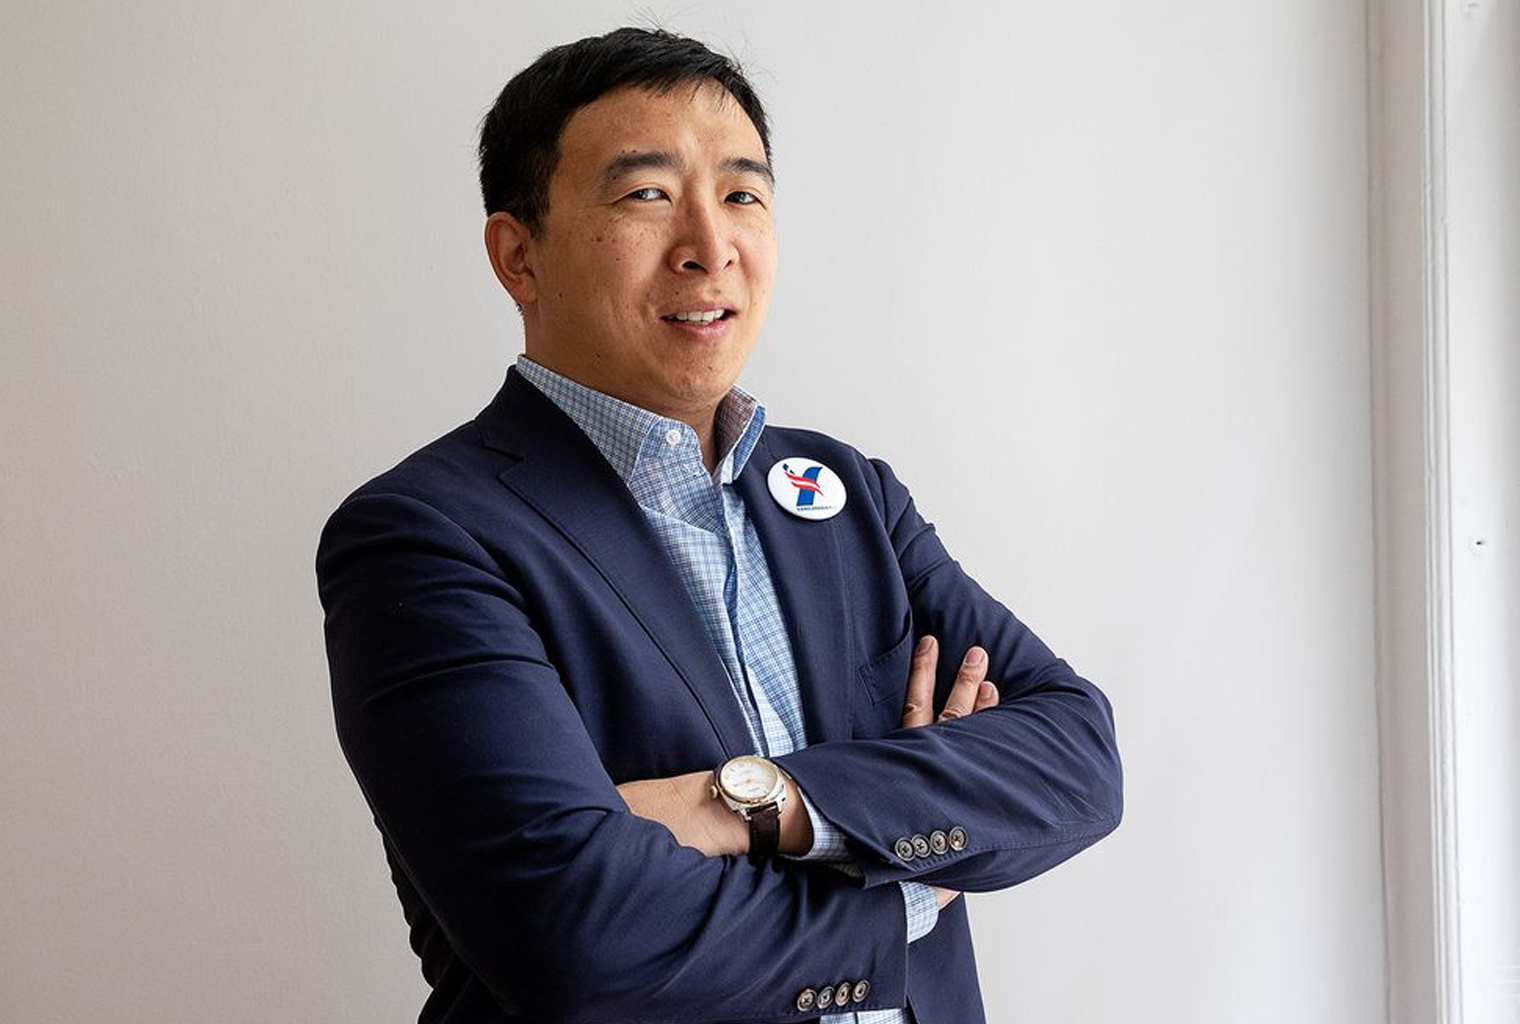 Presidential Candidate Andrew Yang Discusses His Plan for Cryptocurrencies